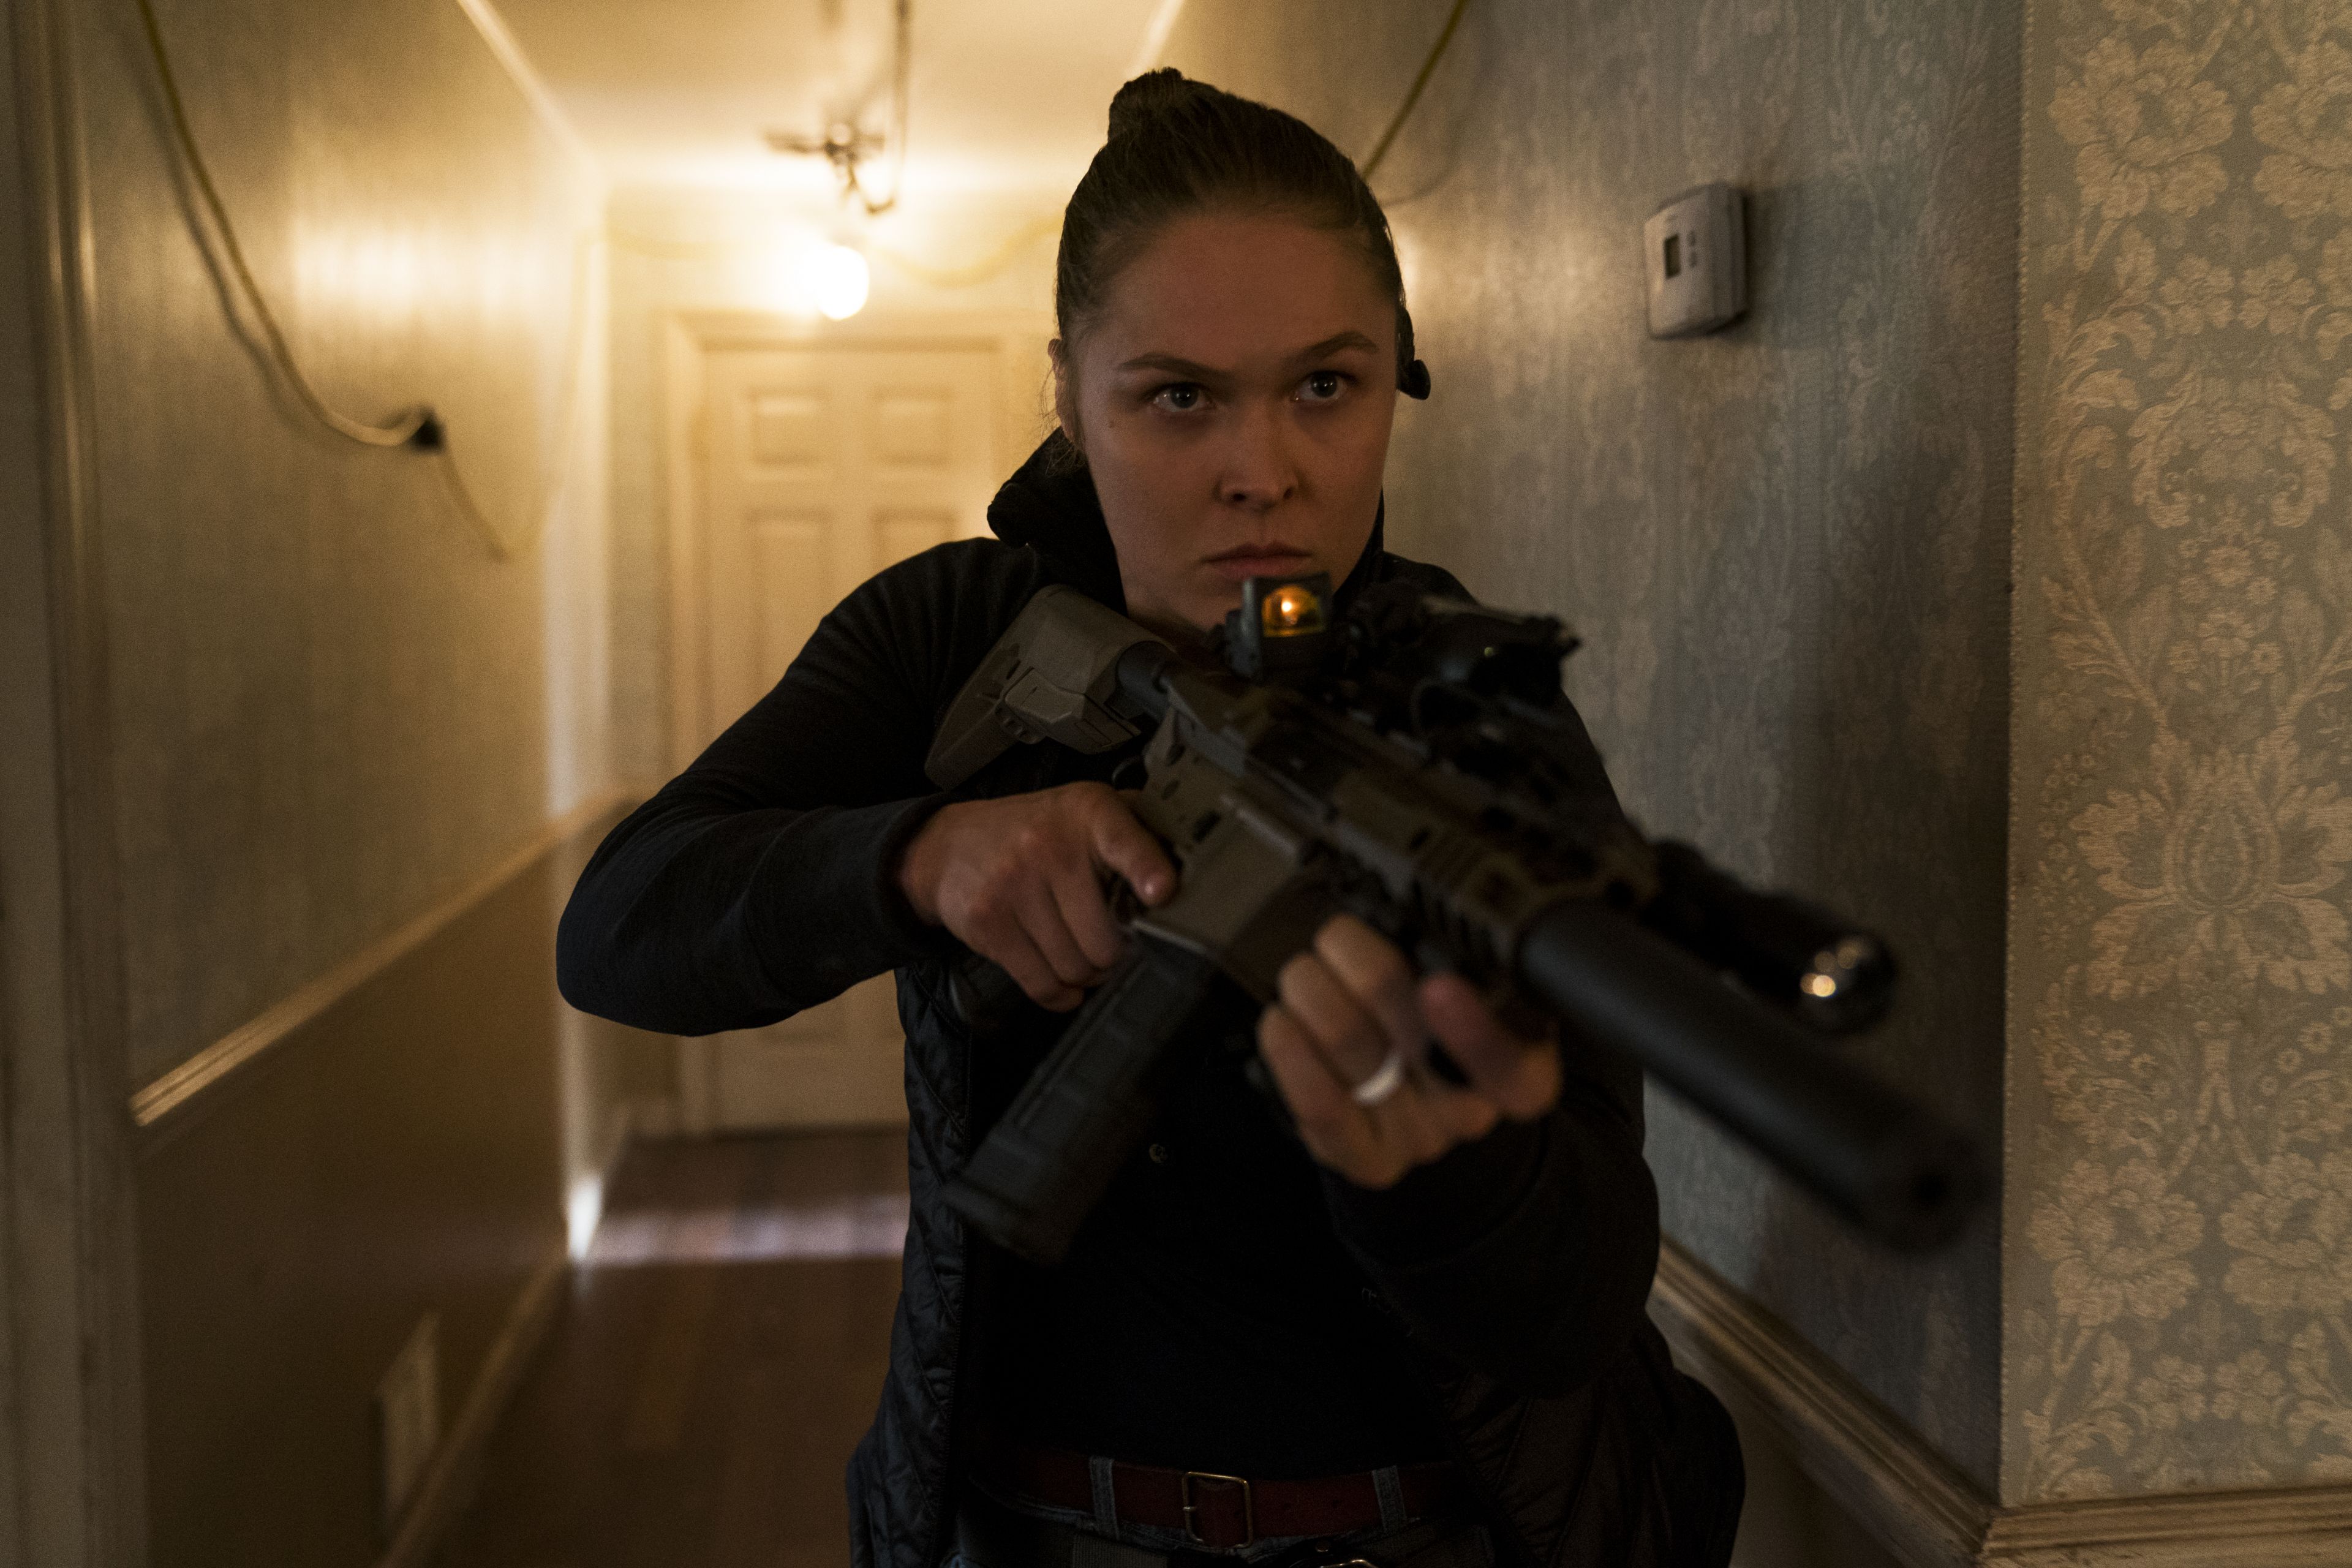 ART OF THE CUT with Melissa Lawson-Cheung and Colby Parker, Junior, ACE on editing "Mile 22" 3